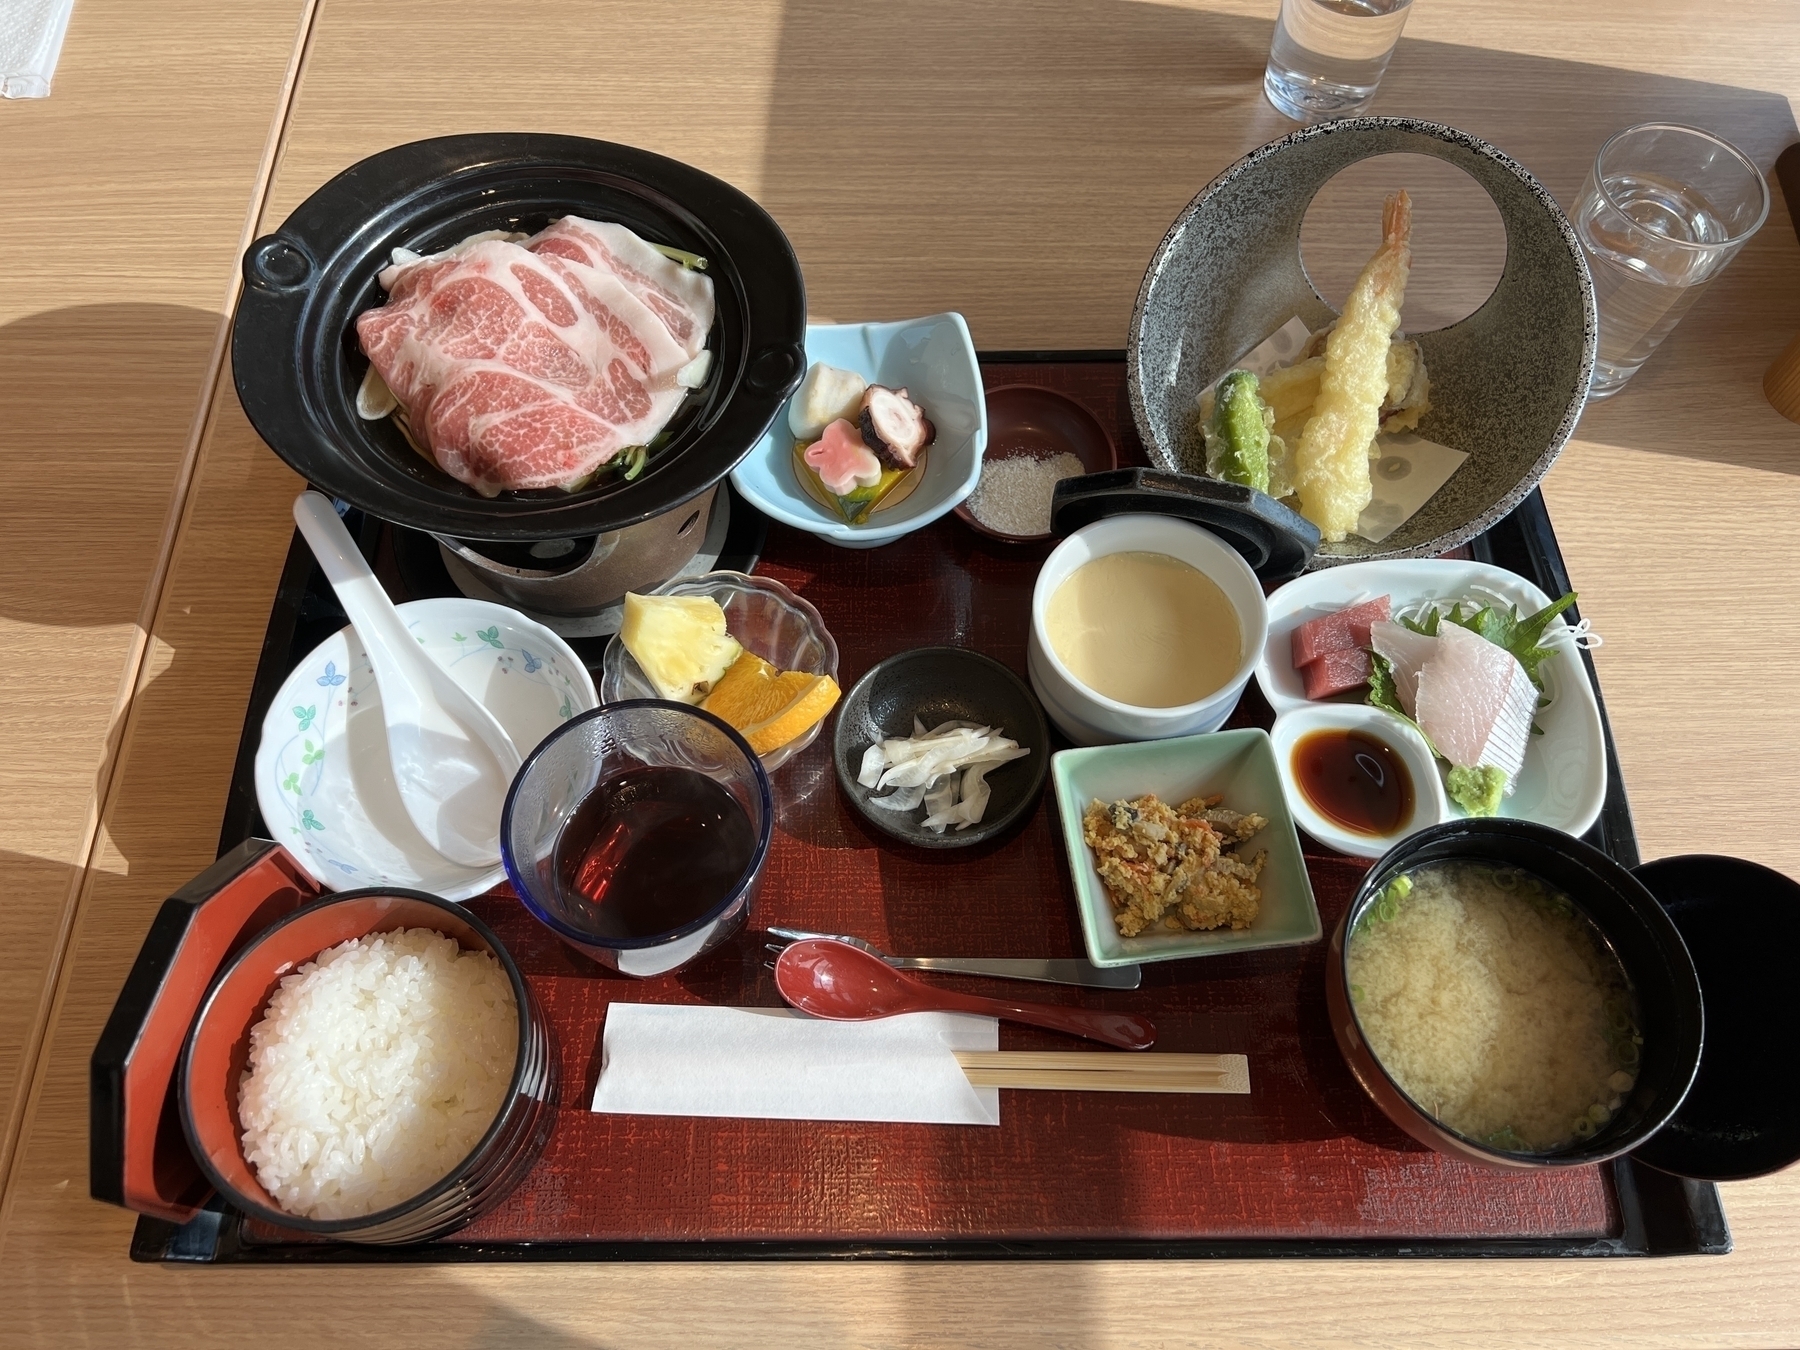 A full course Japanese meal with many dishes